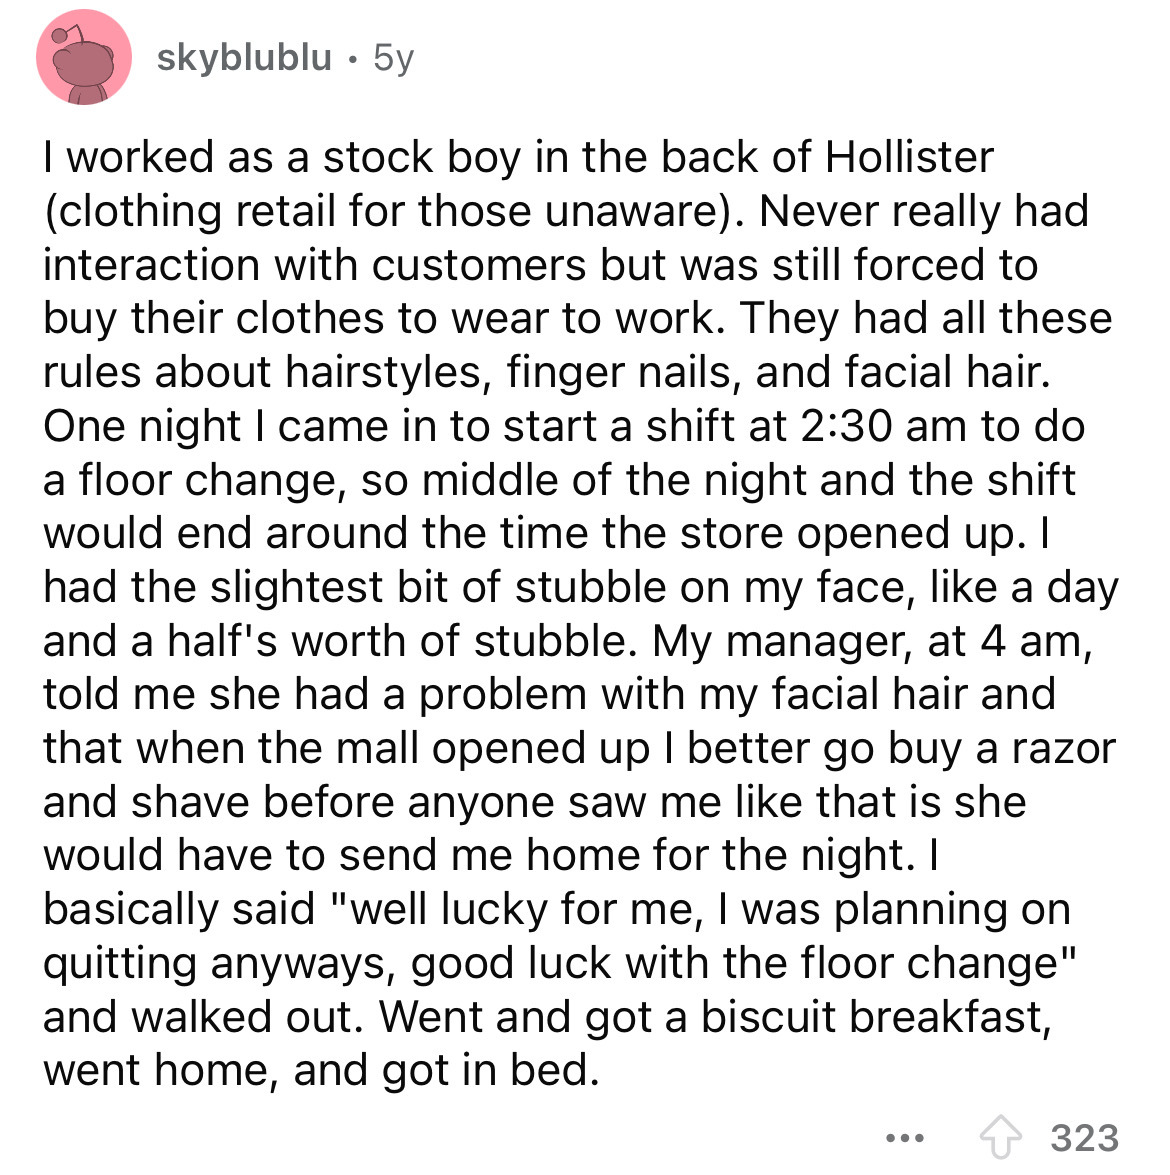 document - skyblublu 5y I worked as a stock boy in the back of Hollister clothing retail for those unaware. Never really had interaction with customers but was still forced to buy their clothes to wear to work. They had all these rules about hairstyles, f